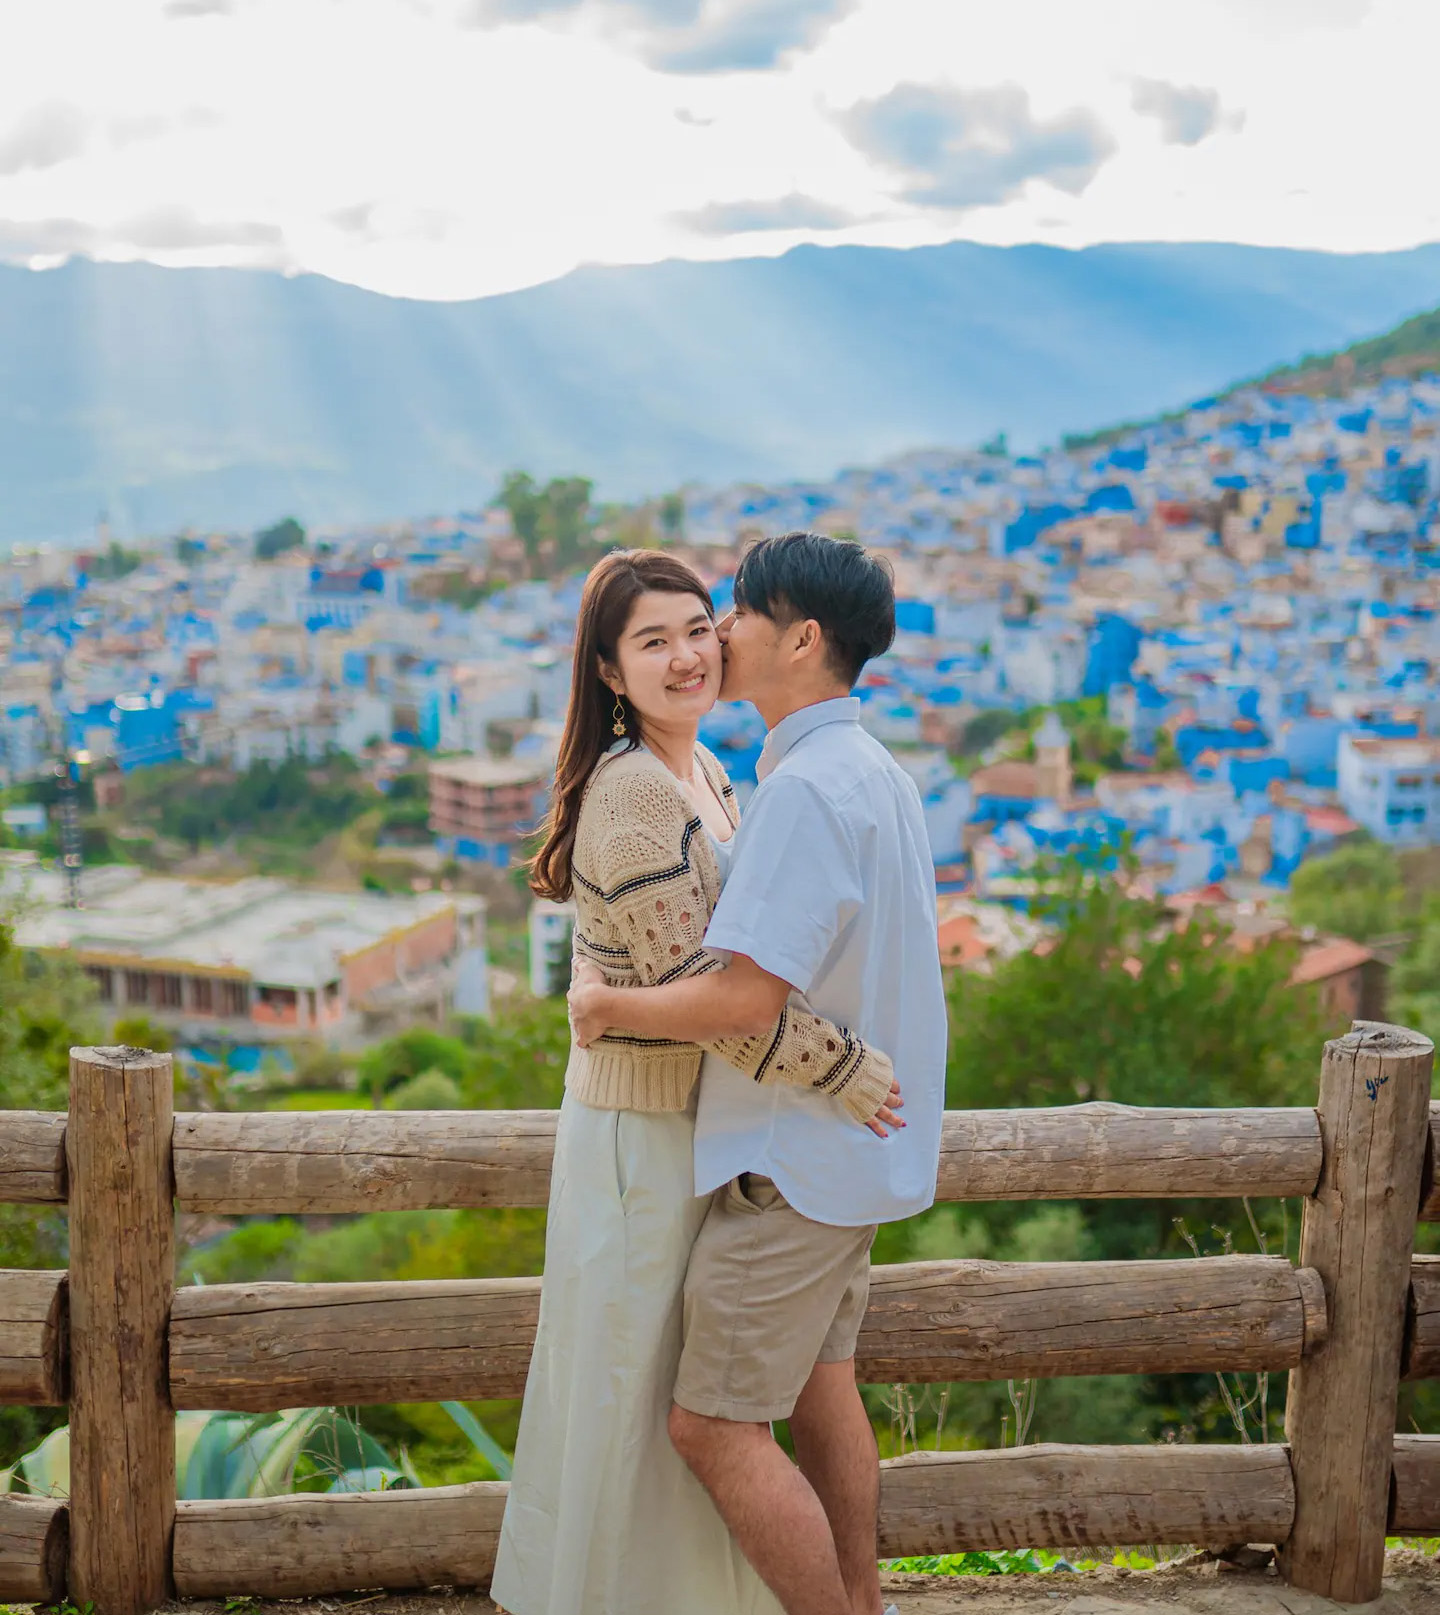 Professional Photoshoot in Chefchaouen